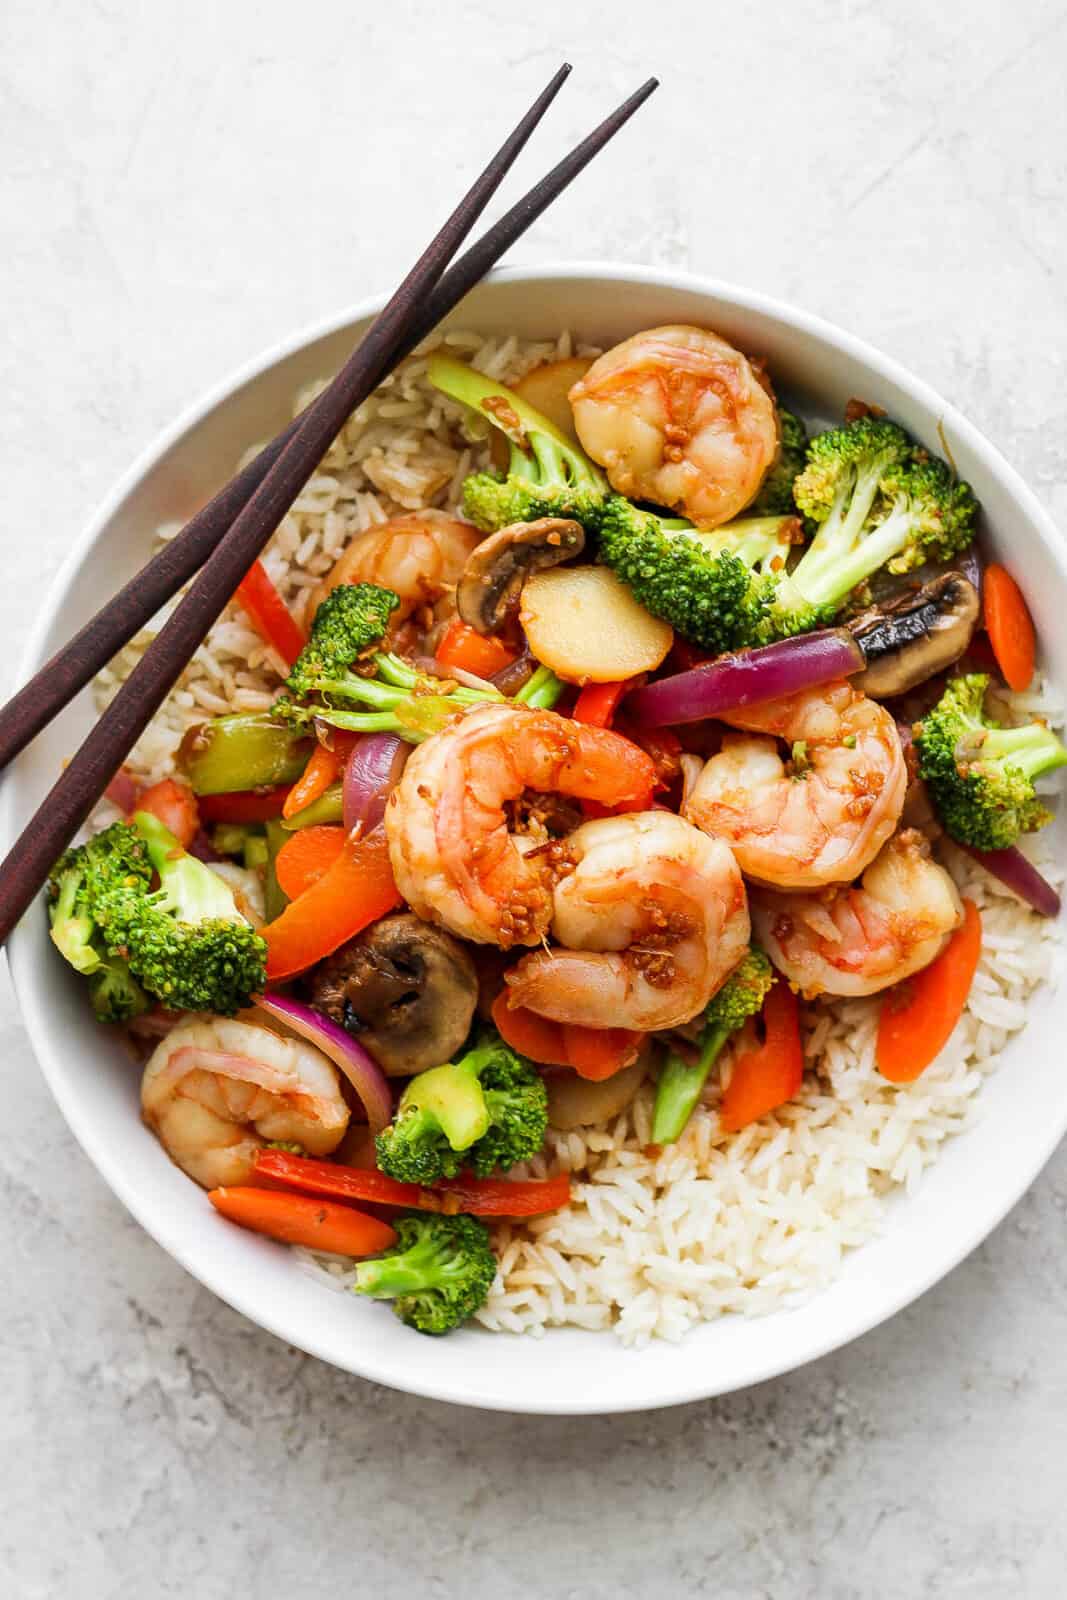 Shrimp stir fry in a bowl with rice.